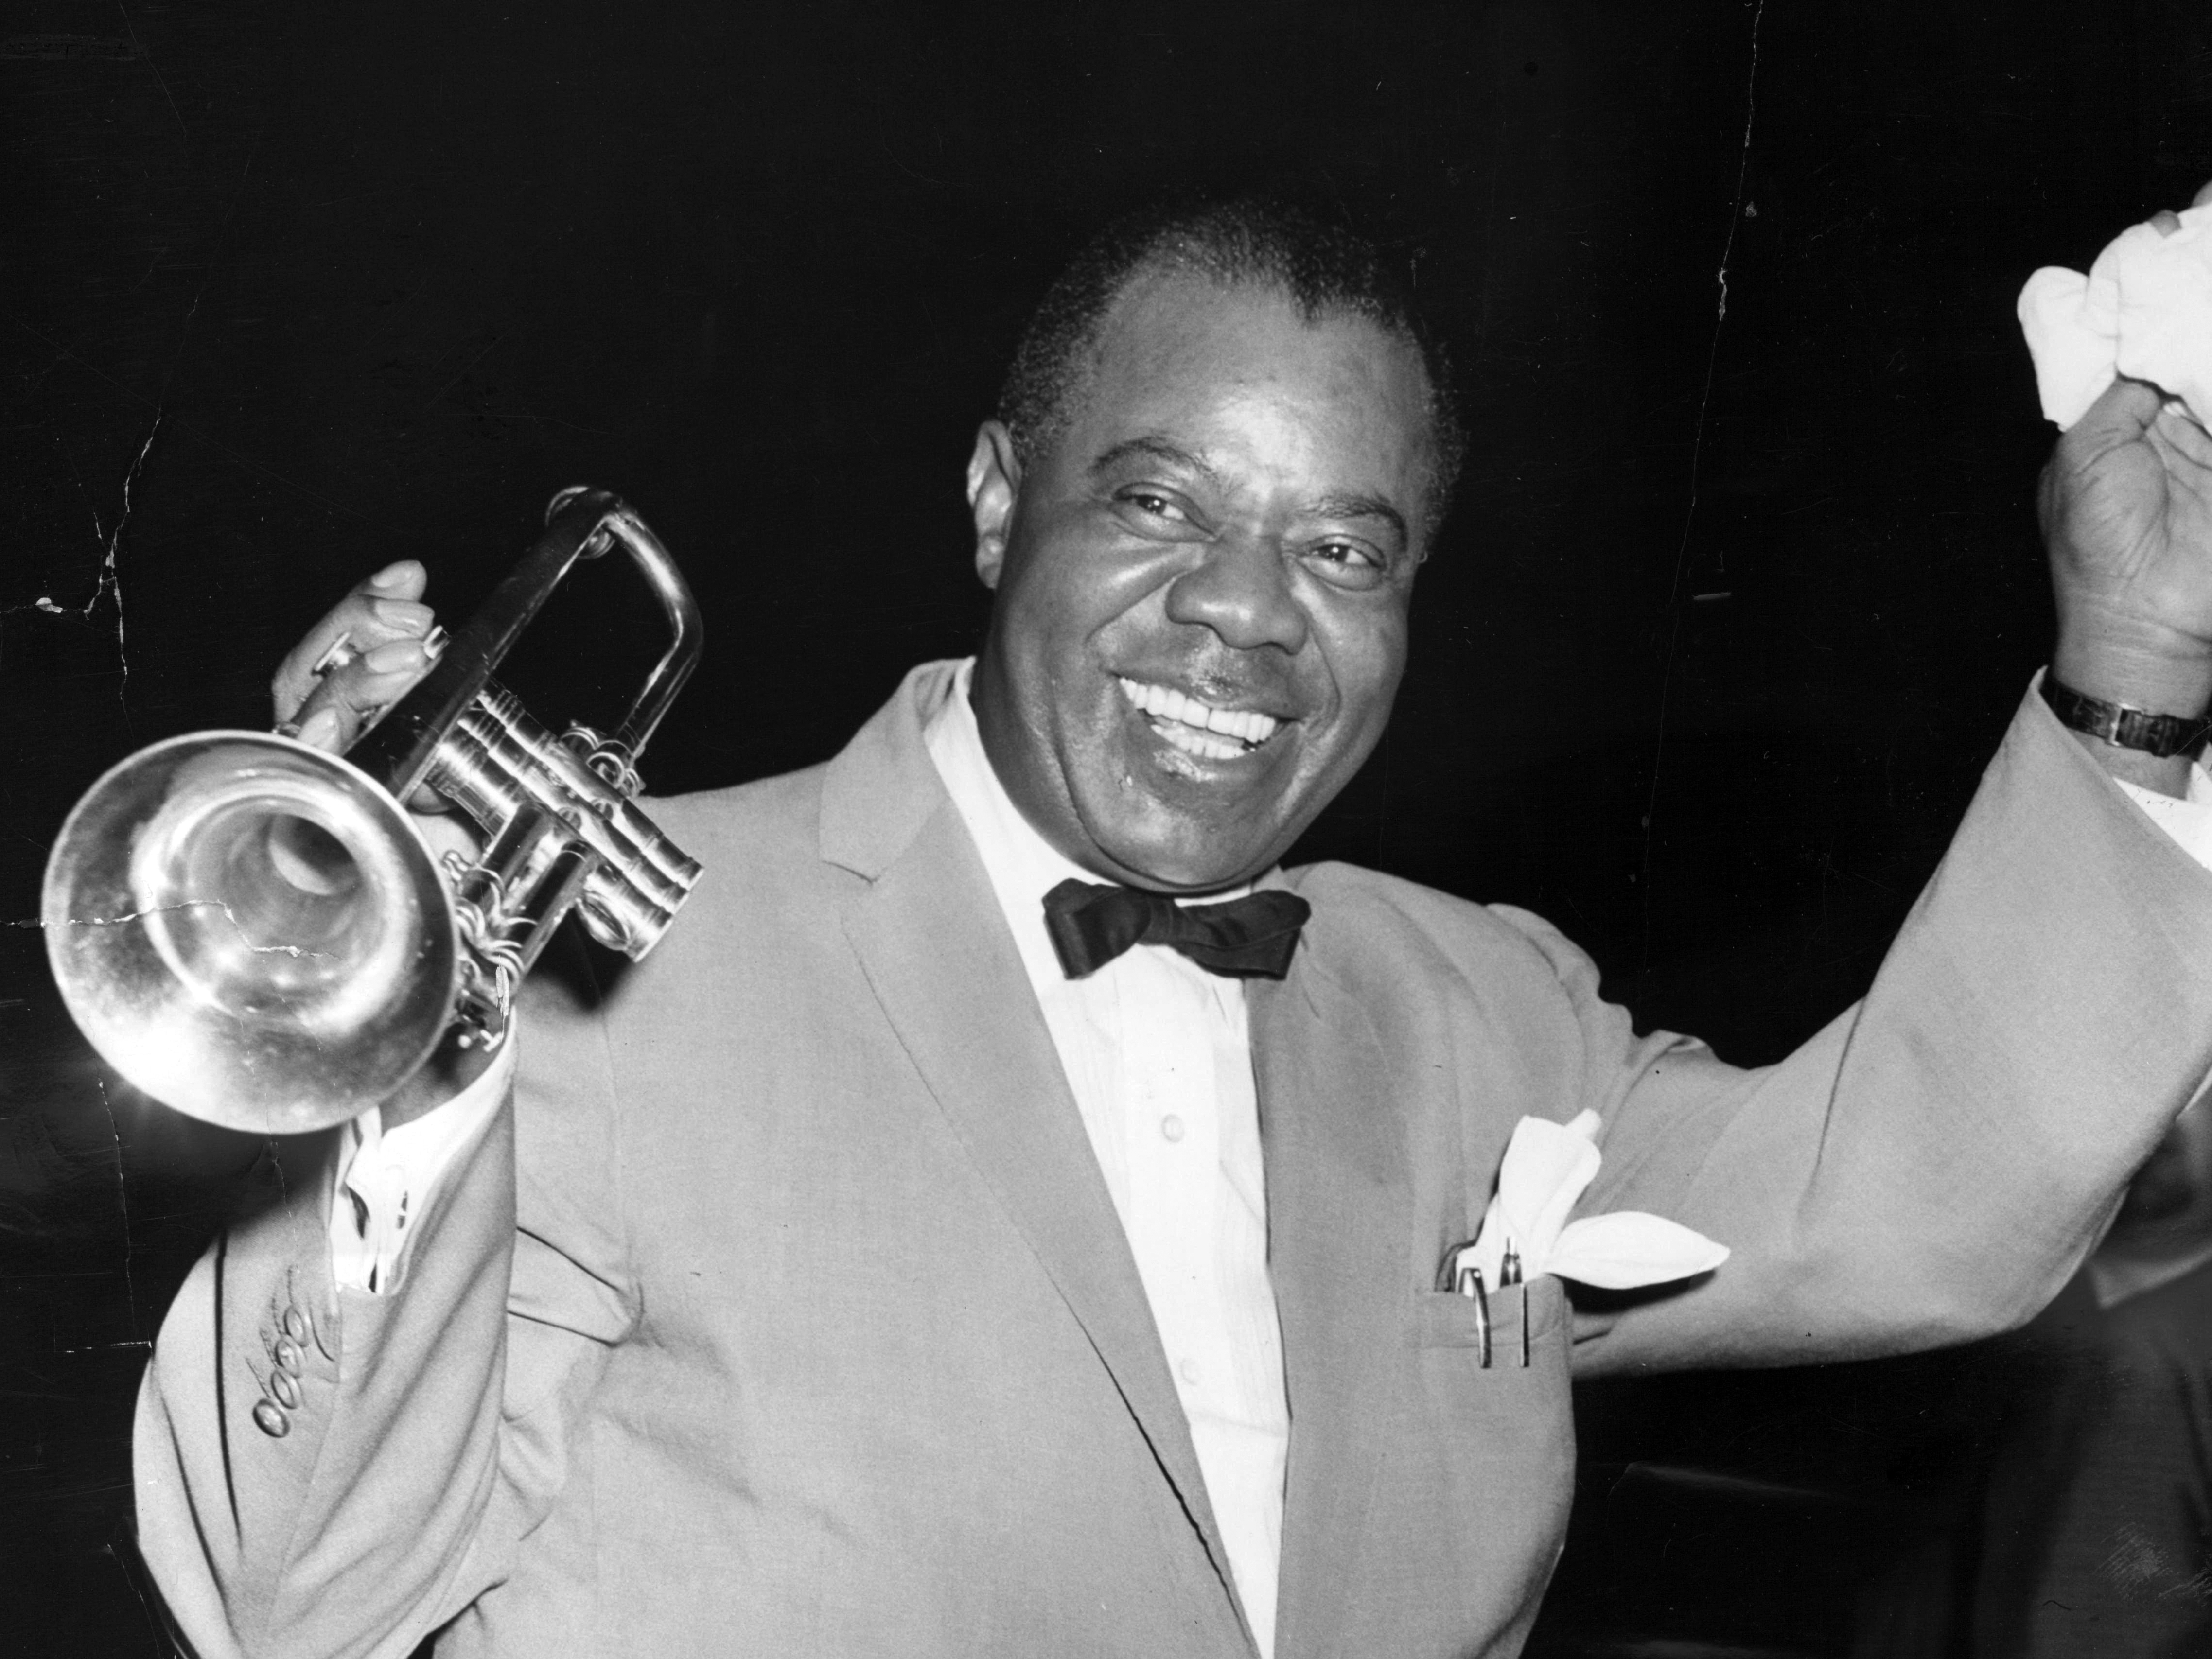 Chicago's next pre-Broadway tryout: A Louis Armstrong musical